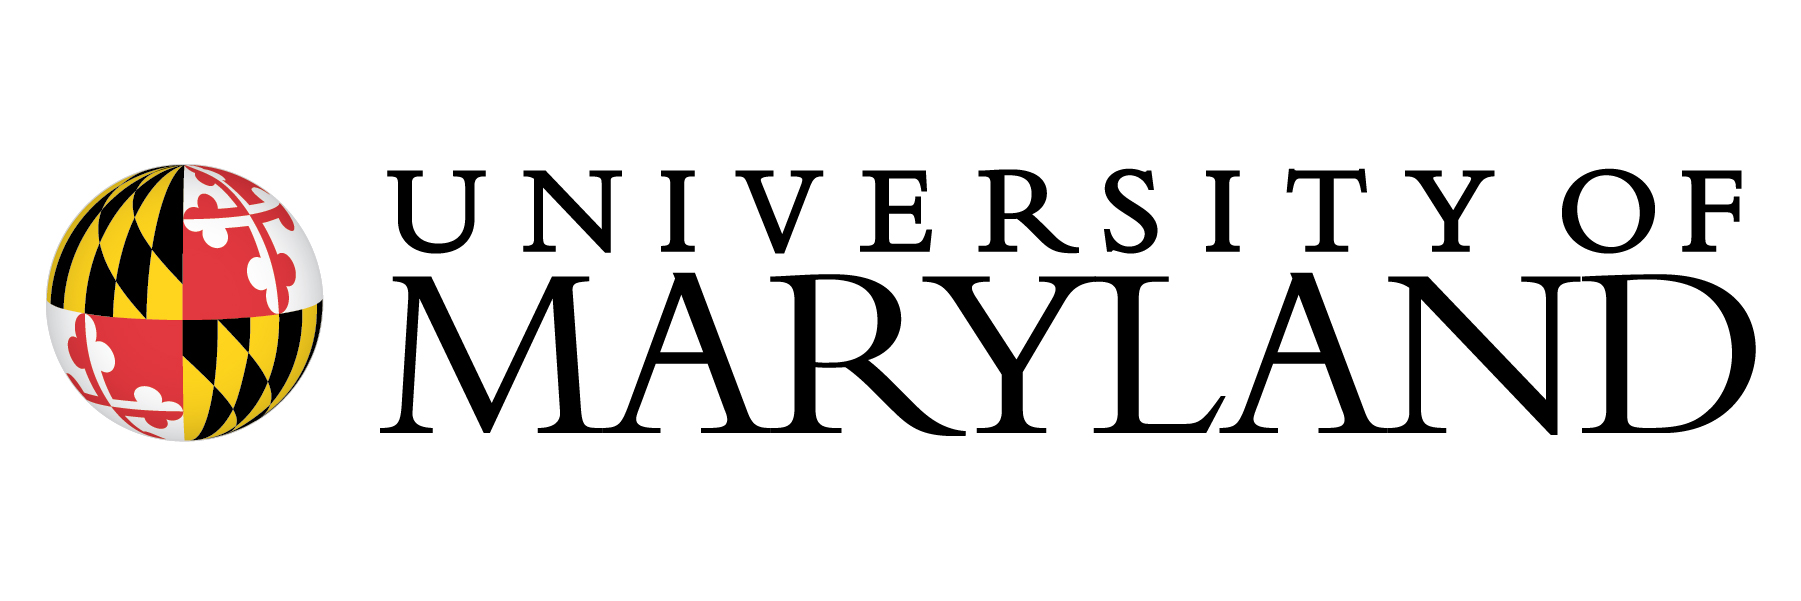 A logo with the text &quot;University of Maryland&quot; in black lettering and a circular icon with two yellow and black checkered quadrants and two red and white patterned quadrants